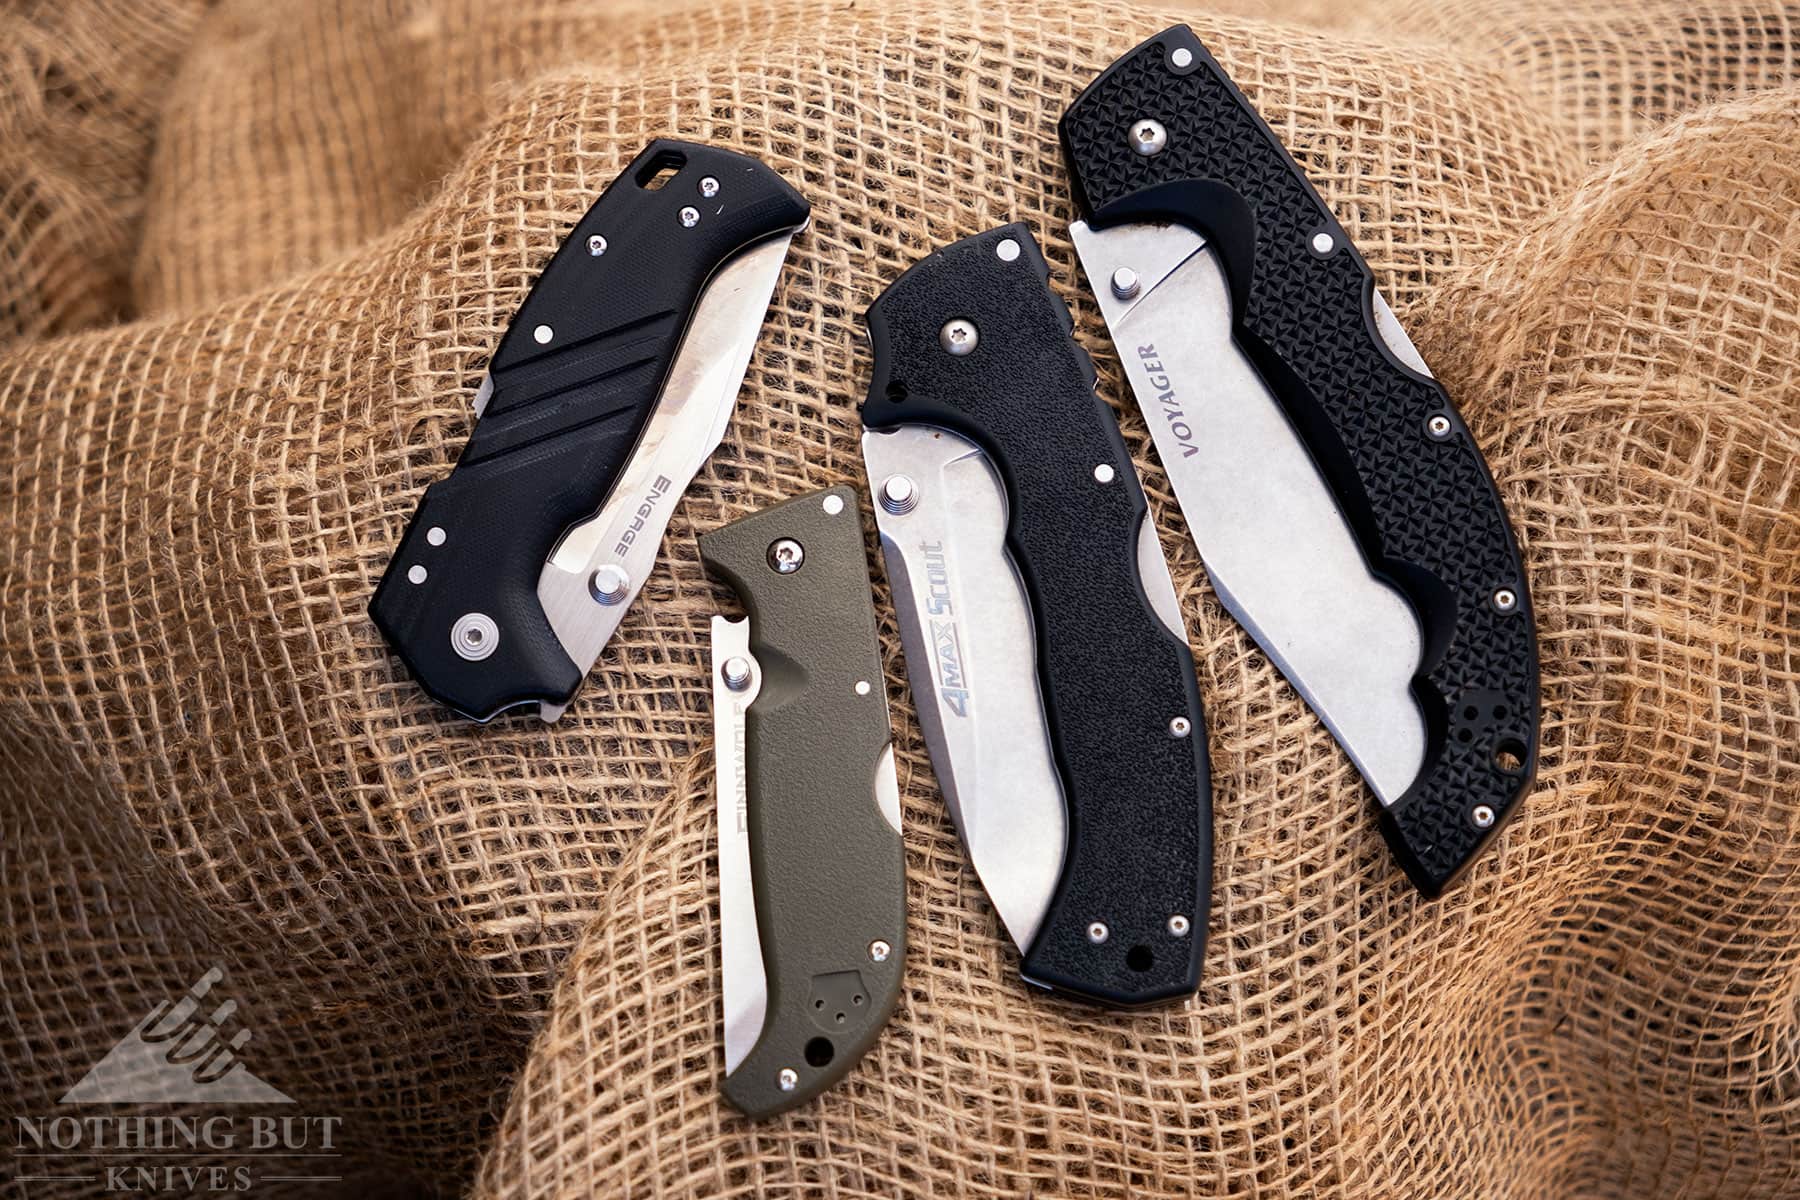 Four pocketknives in the closed position on burlap.